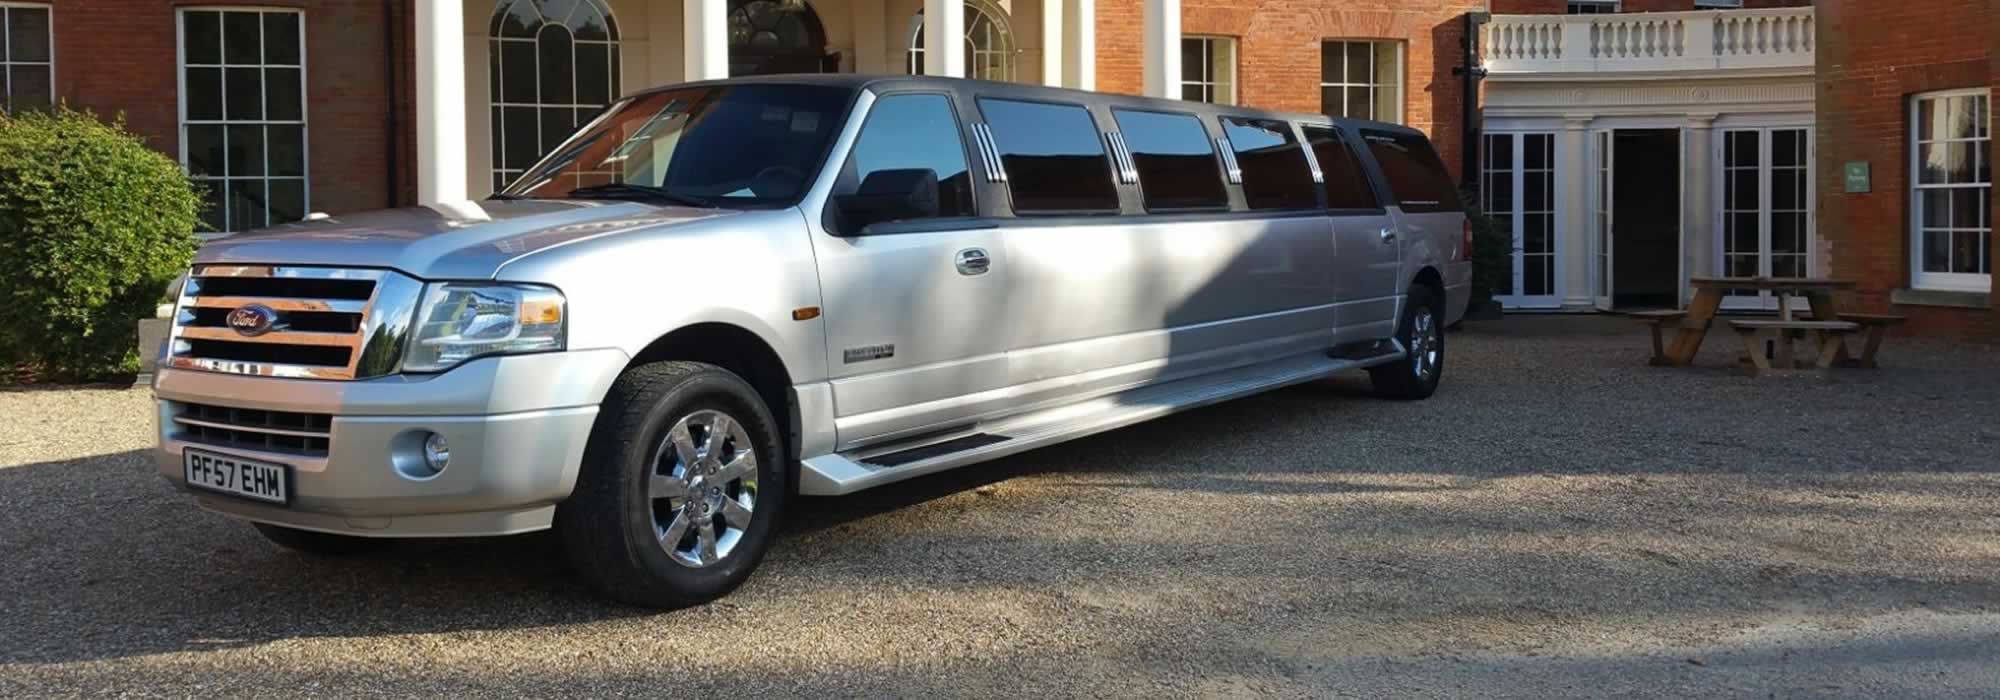 Ford Expedition limo hire